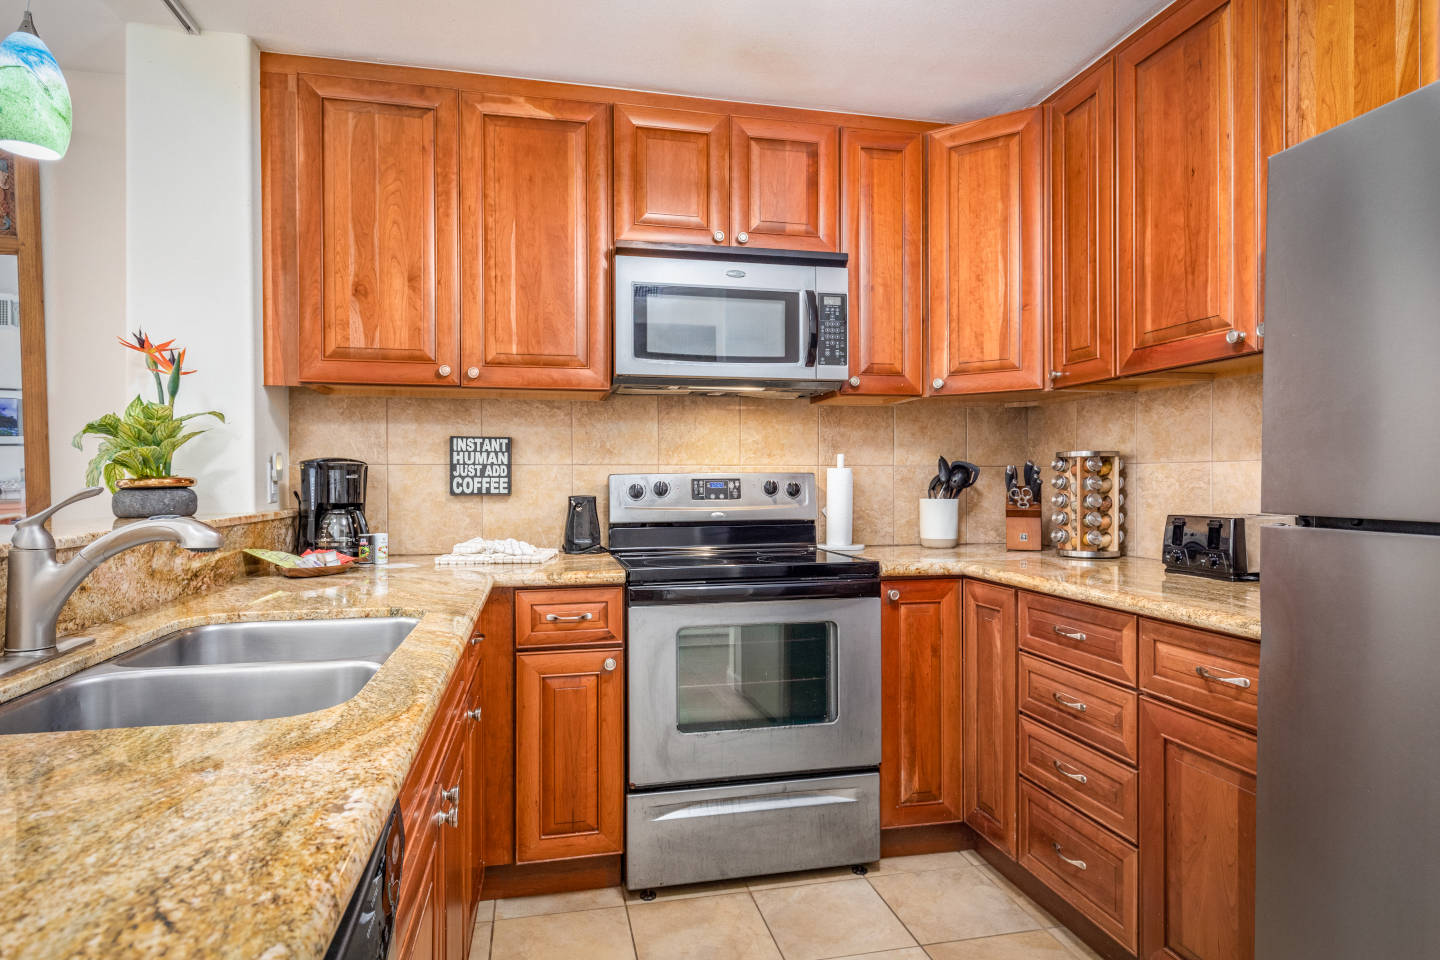 Kitchen with marble countertops, full-size stainless steel refrigerator and matching oven